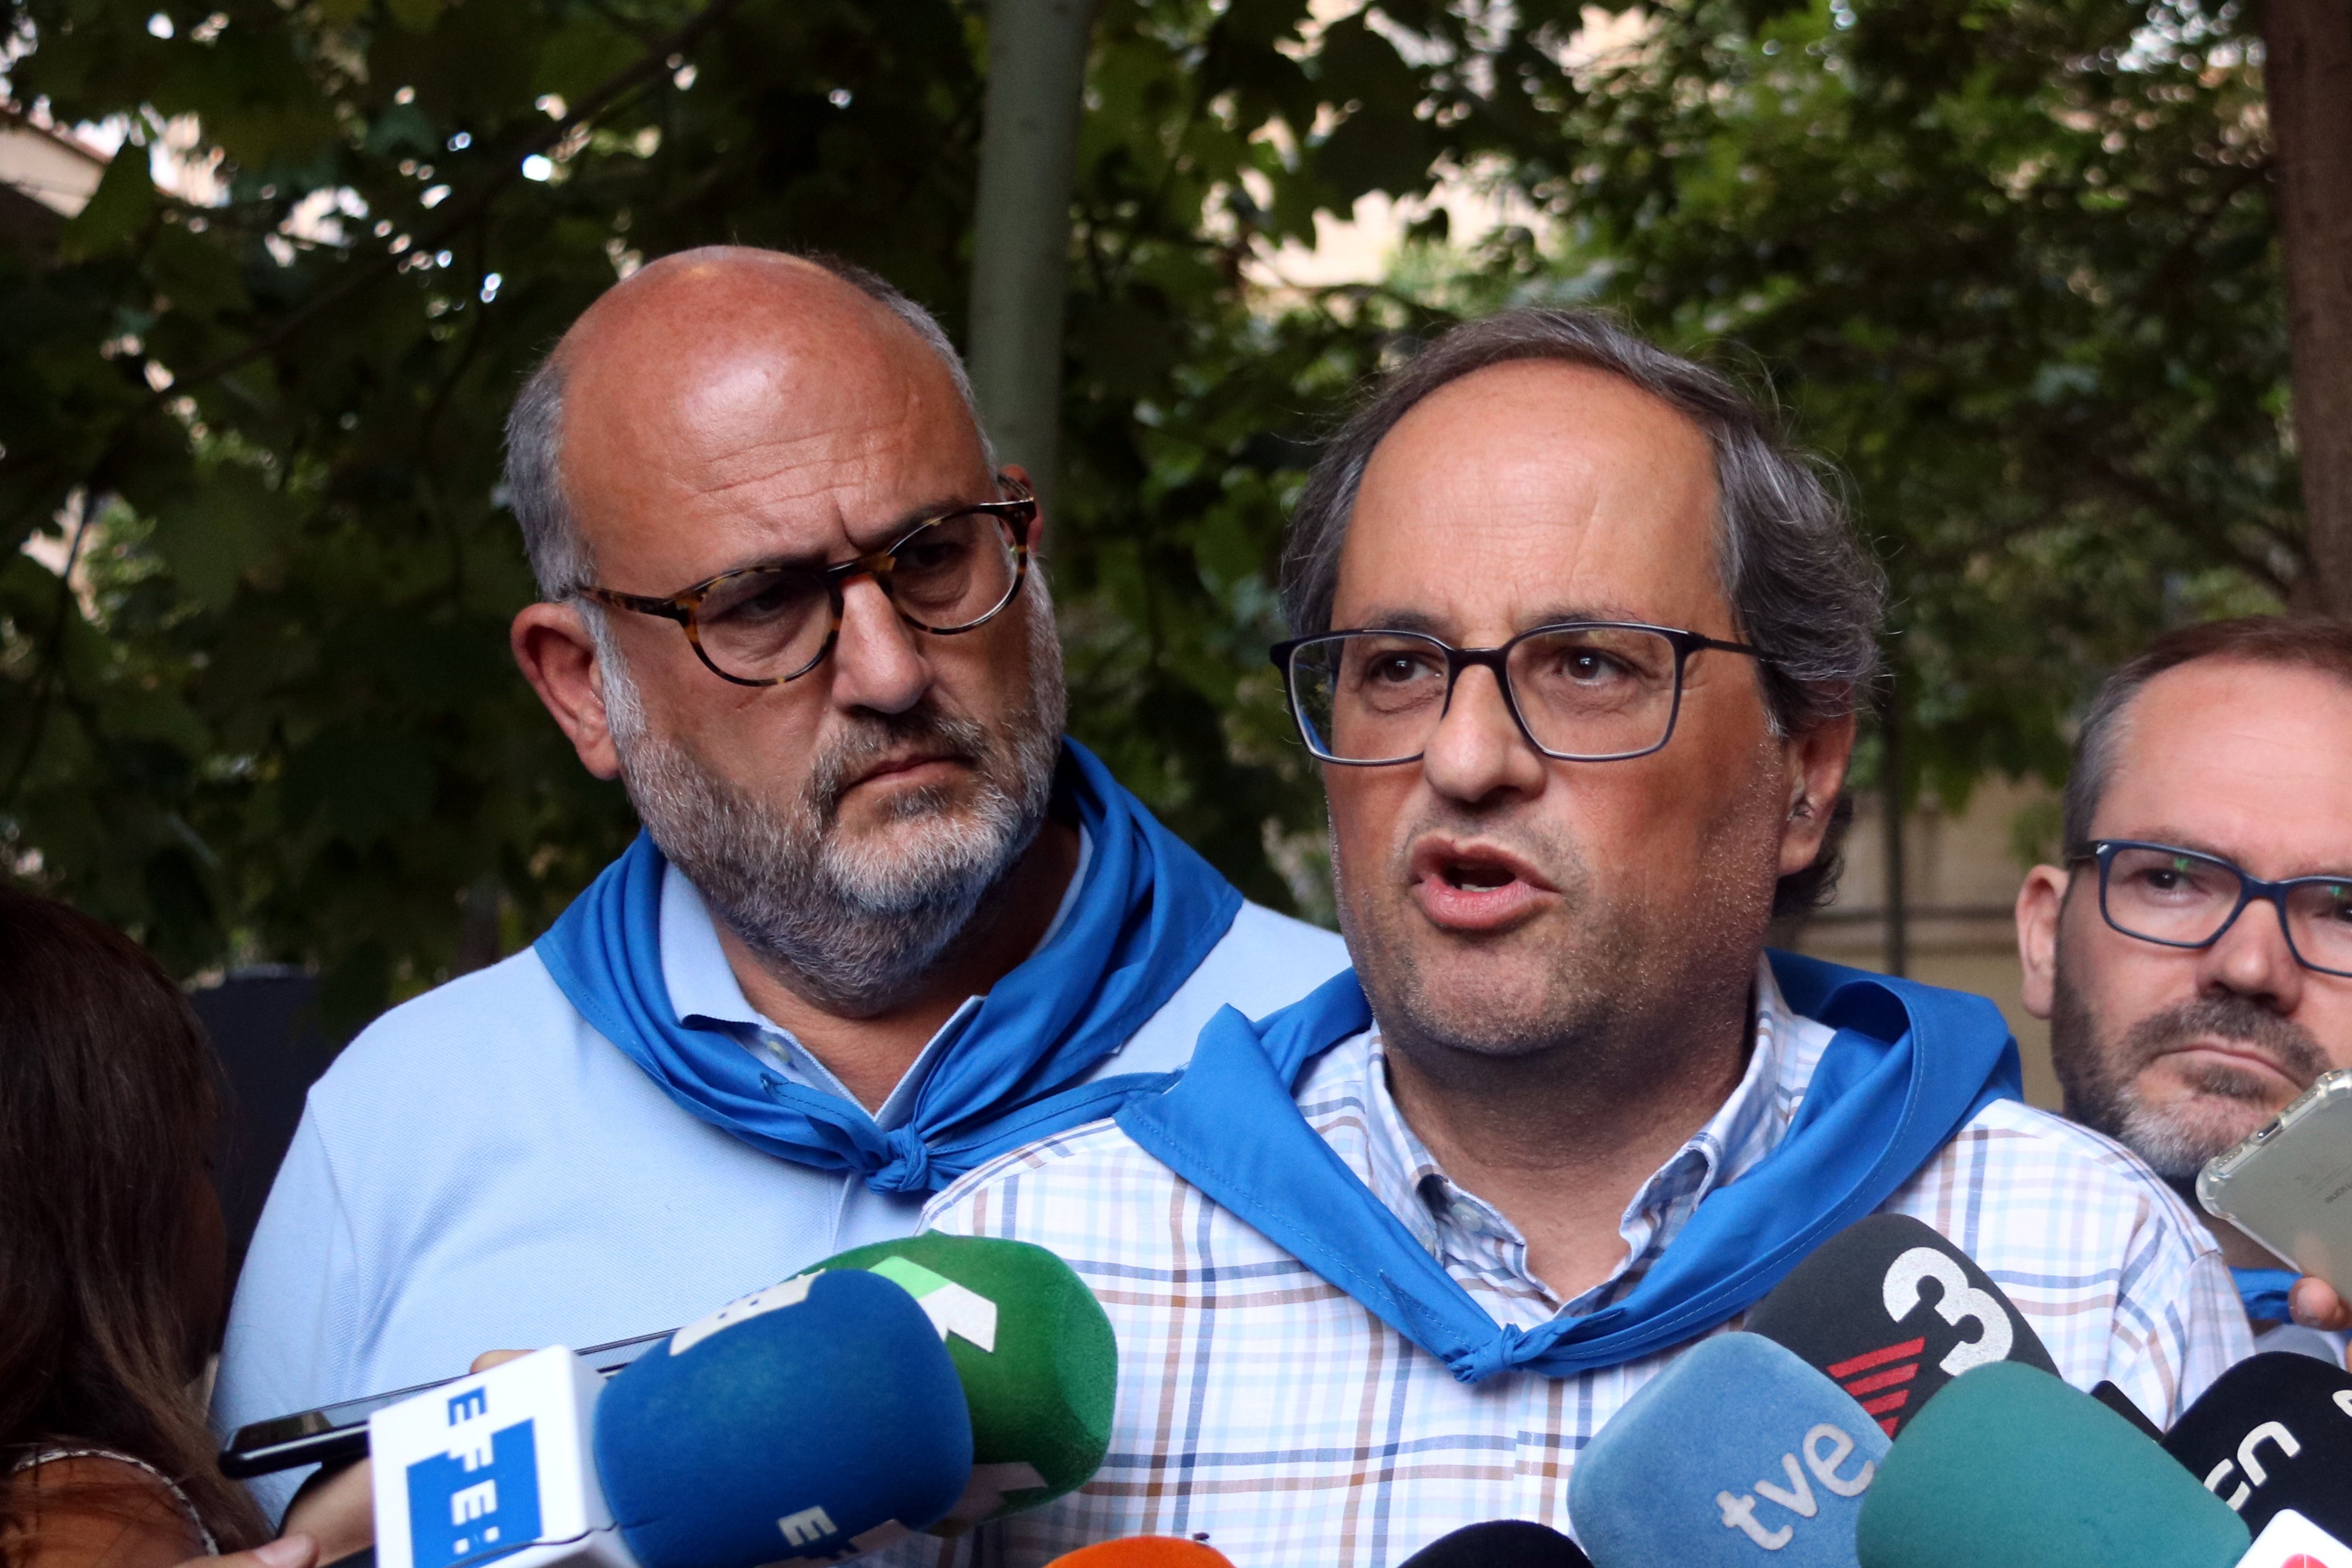 Torra asks Madrid to respond after "unacceptable" Spanish police actions